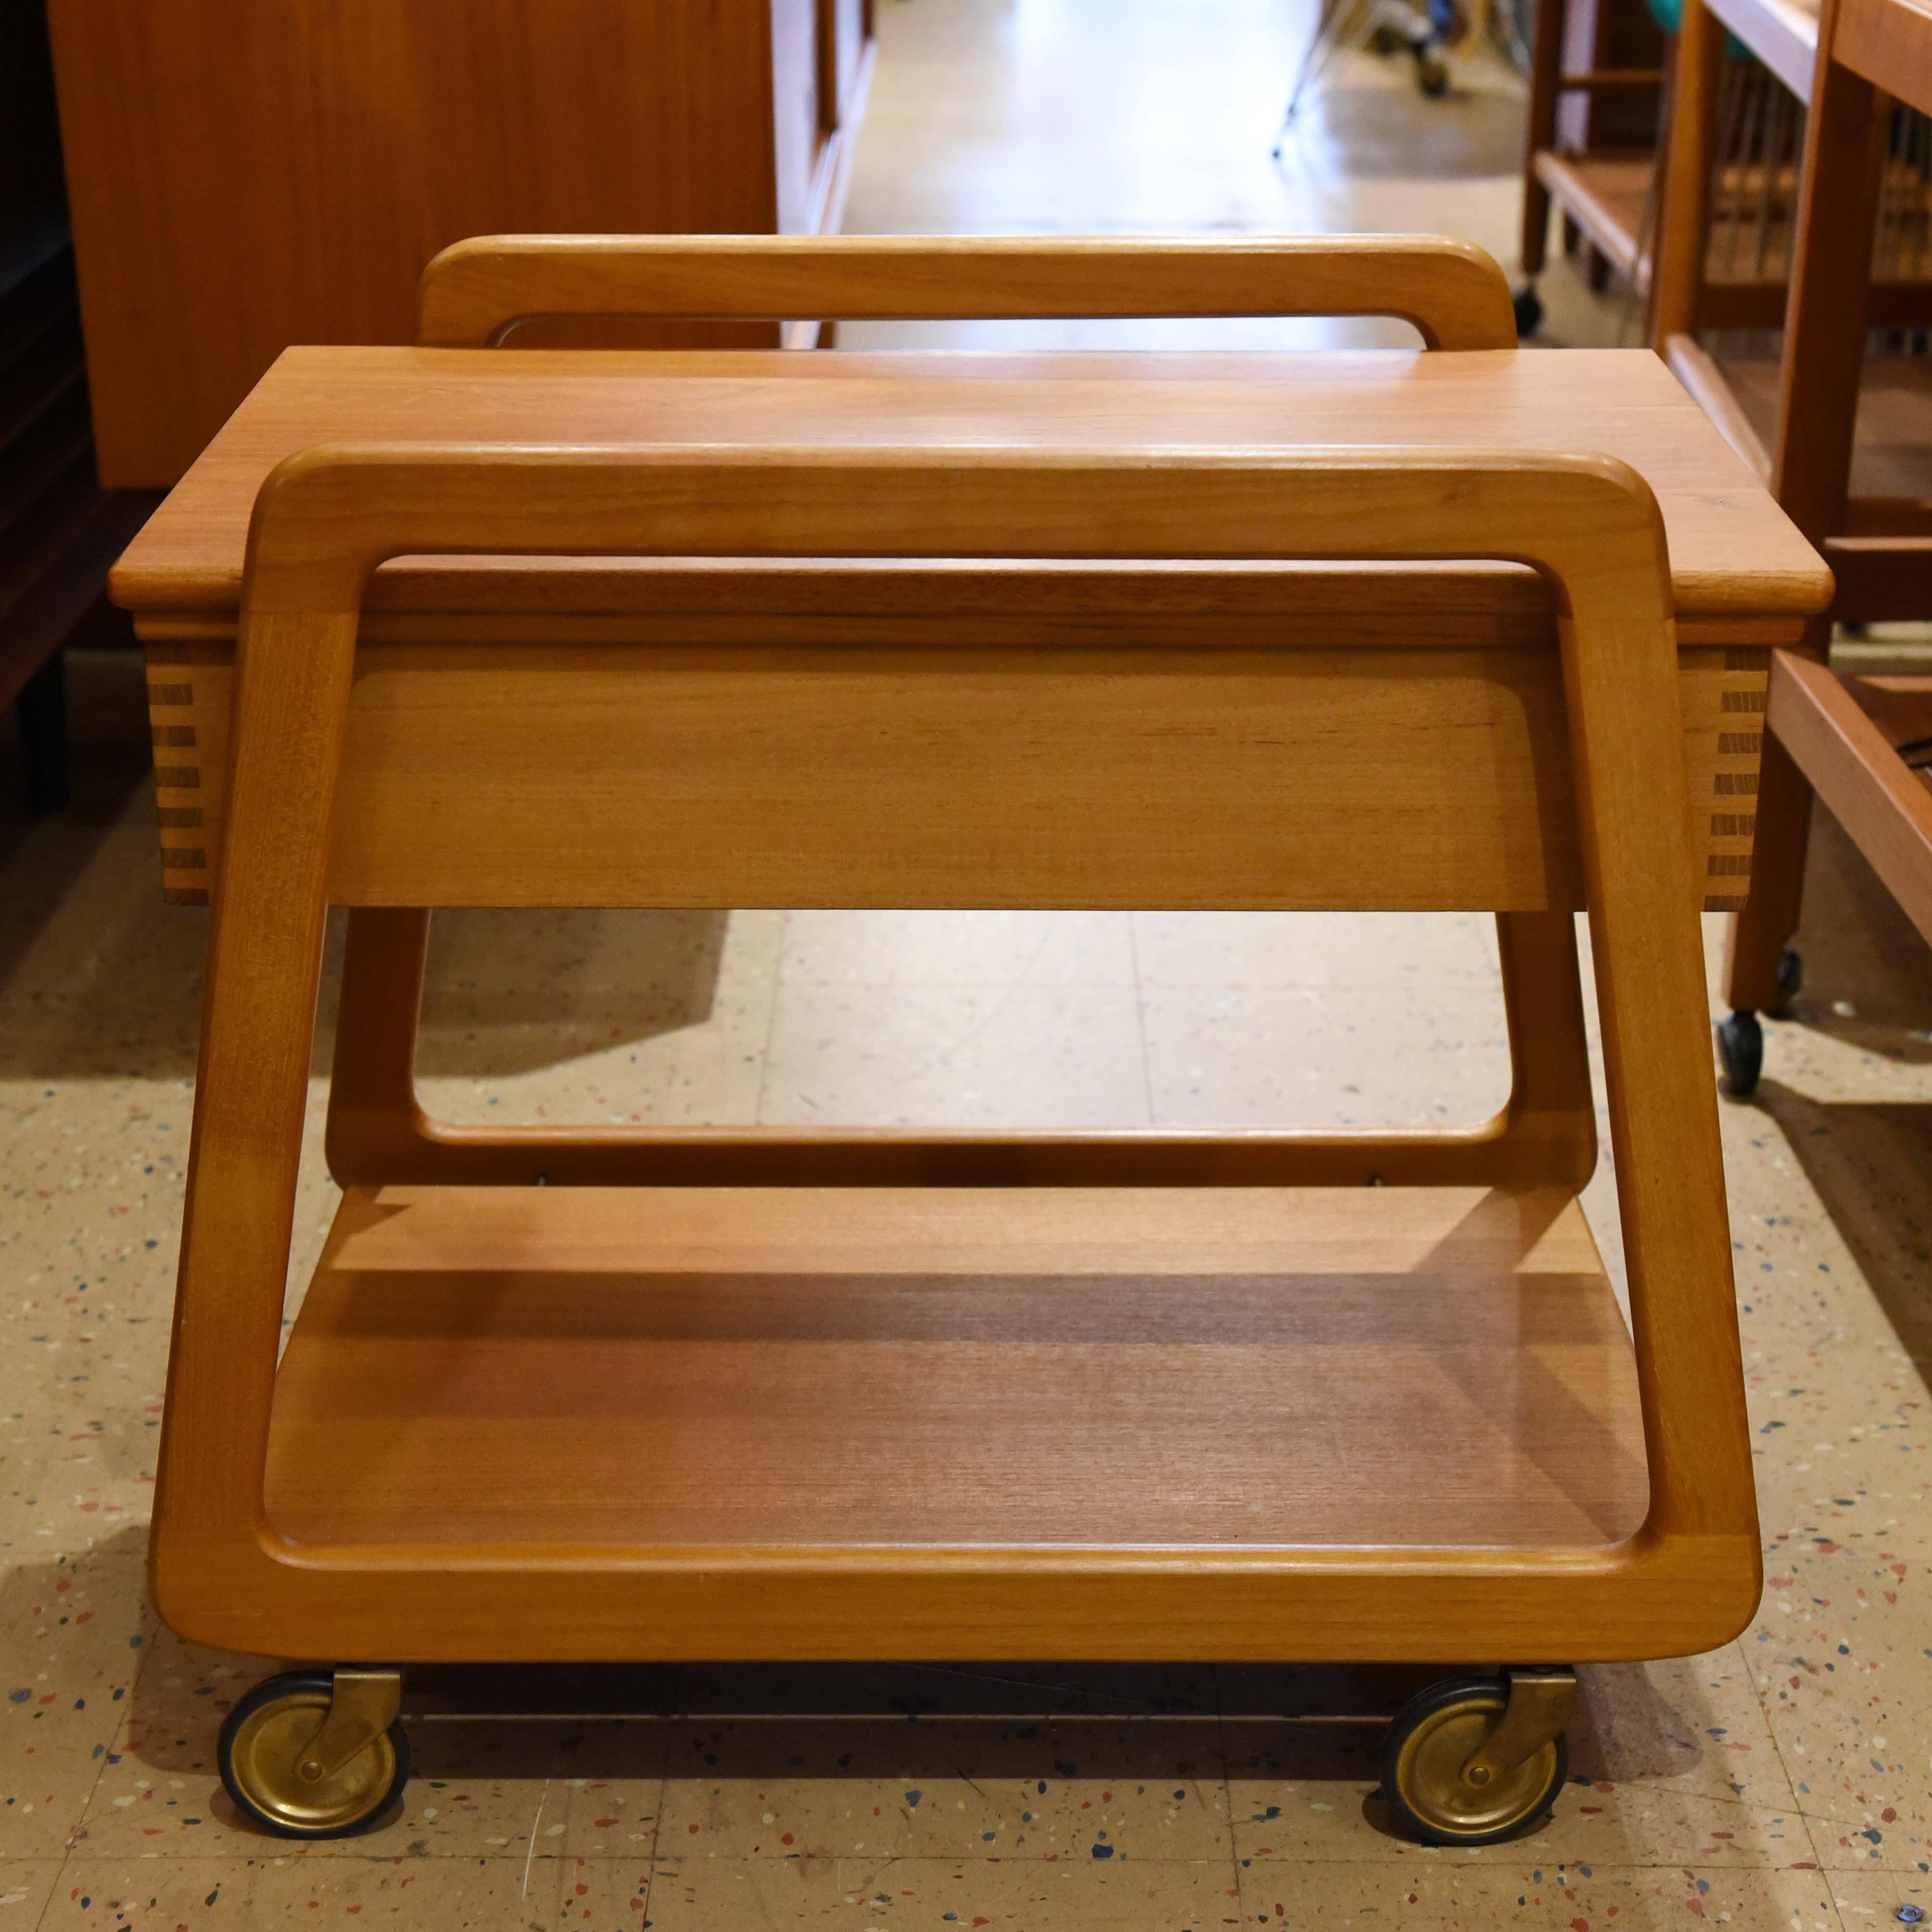 Danish teak mobile sewing cart/trolley with removable compartment. Cover plate can be pulled out on both sides. Very good vintage condition with original label.